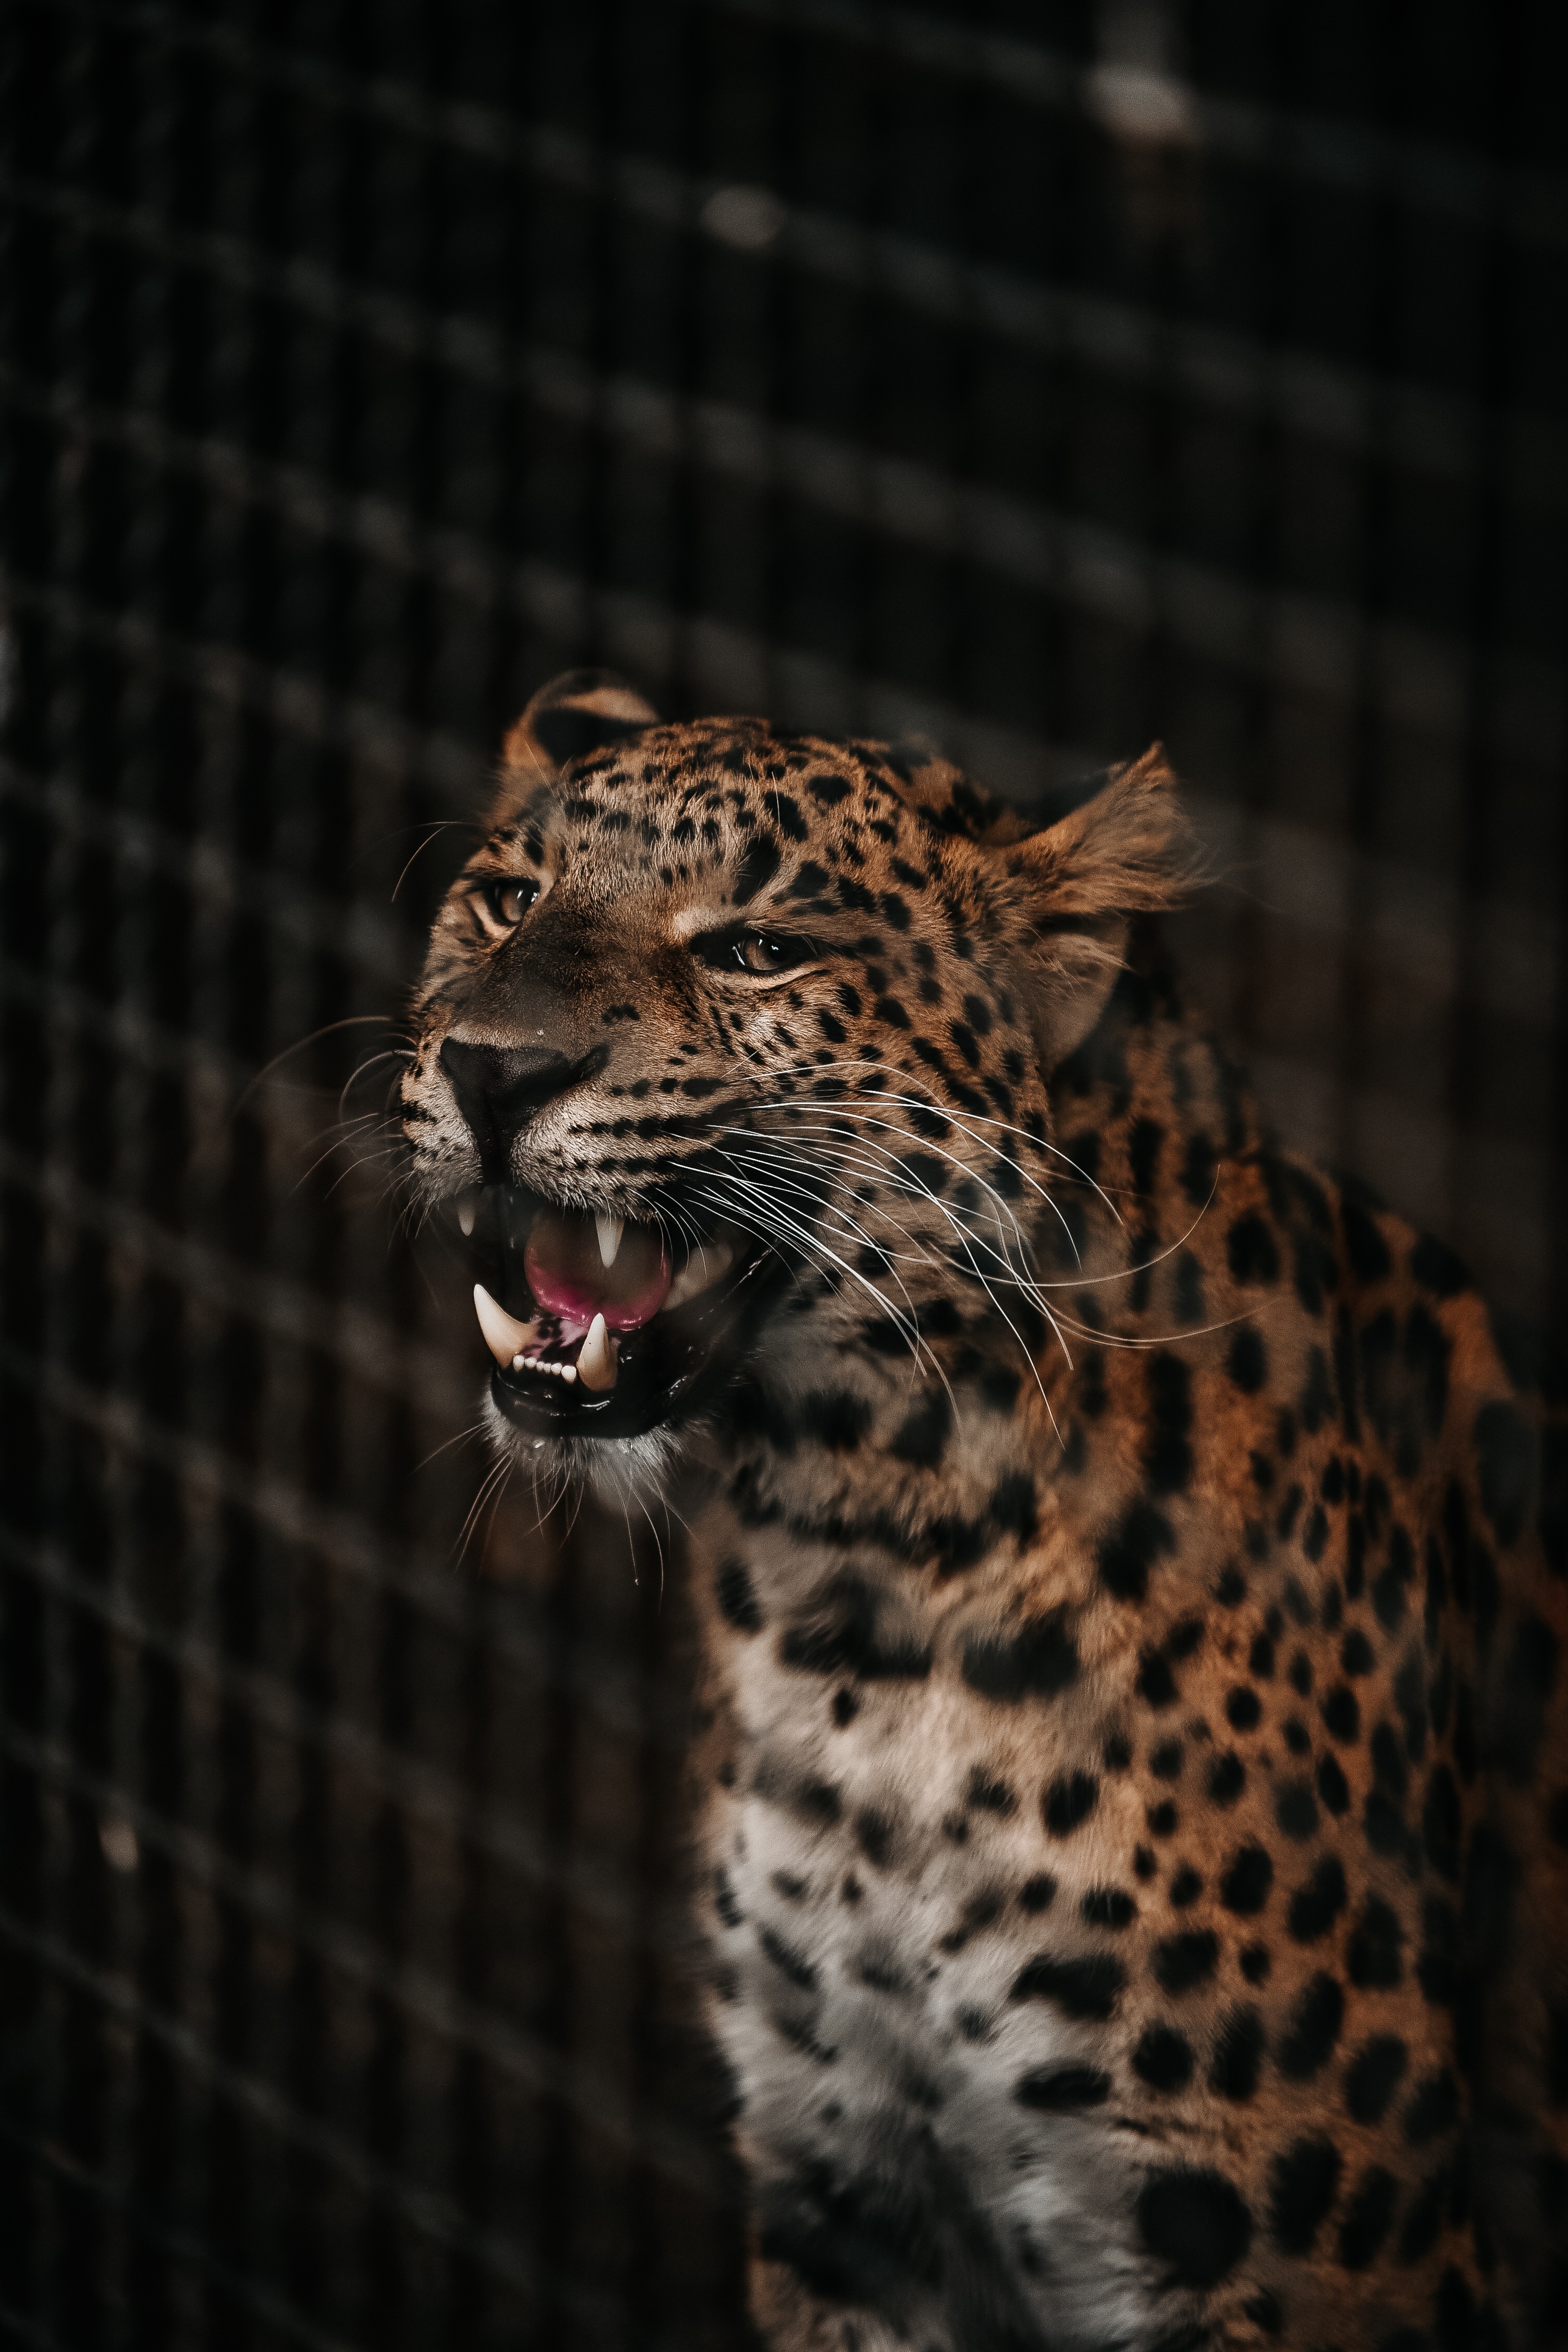 62106 download wallpaper animals, cheetah, grin, muzzle, predator, big cat, fangs screensavers and pictures for free